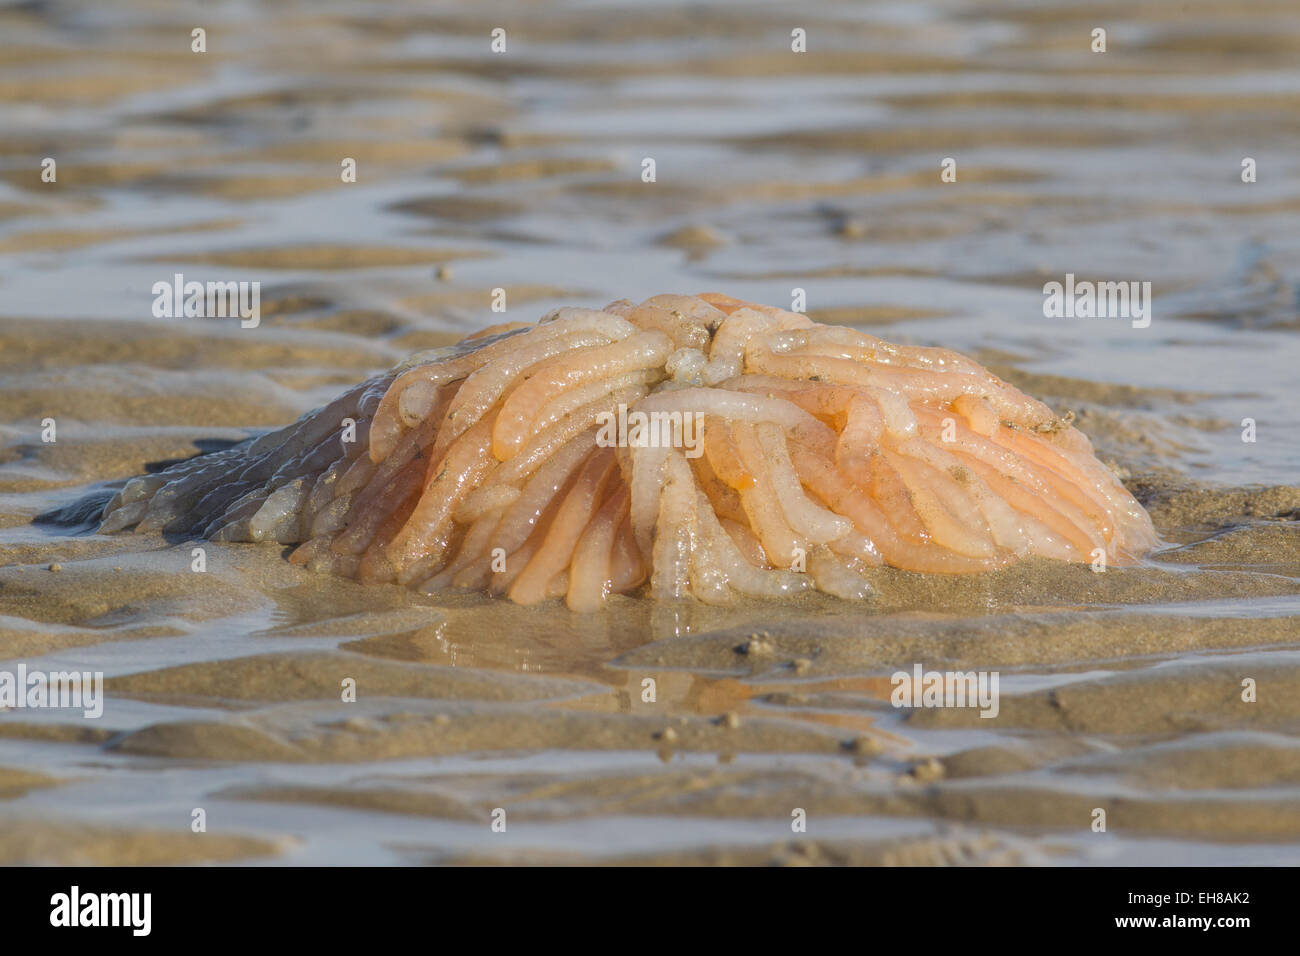 Eggs from the European or Common Squid (Loligo vulgaris) washed up on Dungeness beach, Kent UK, after a storm. Stock Photo